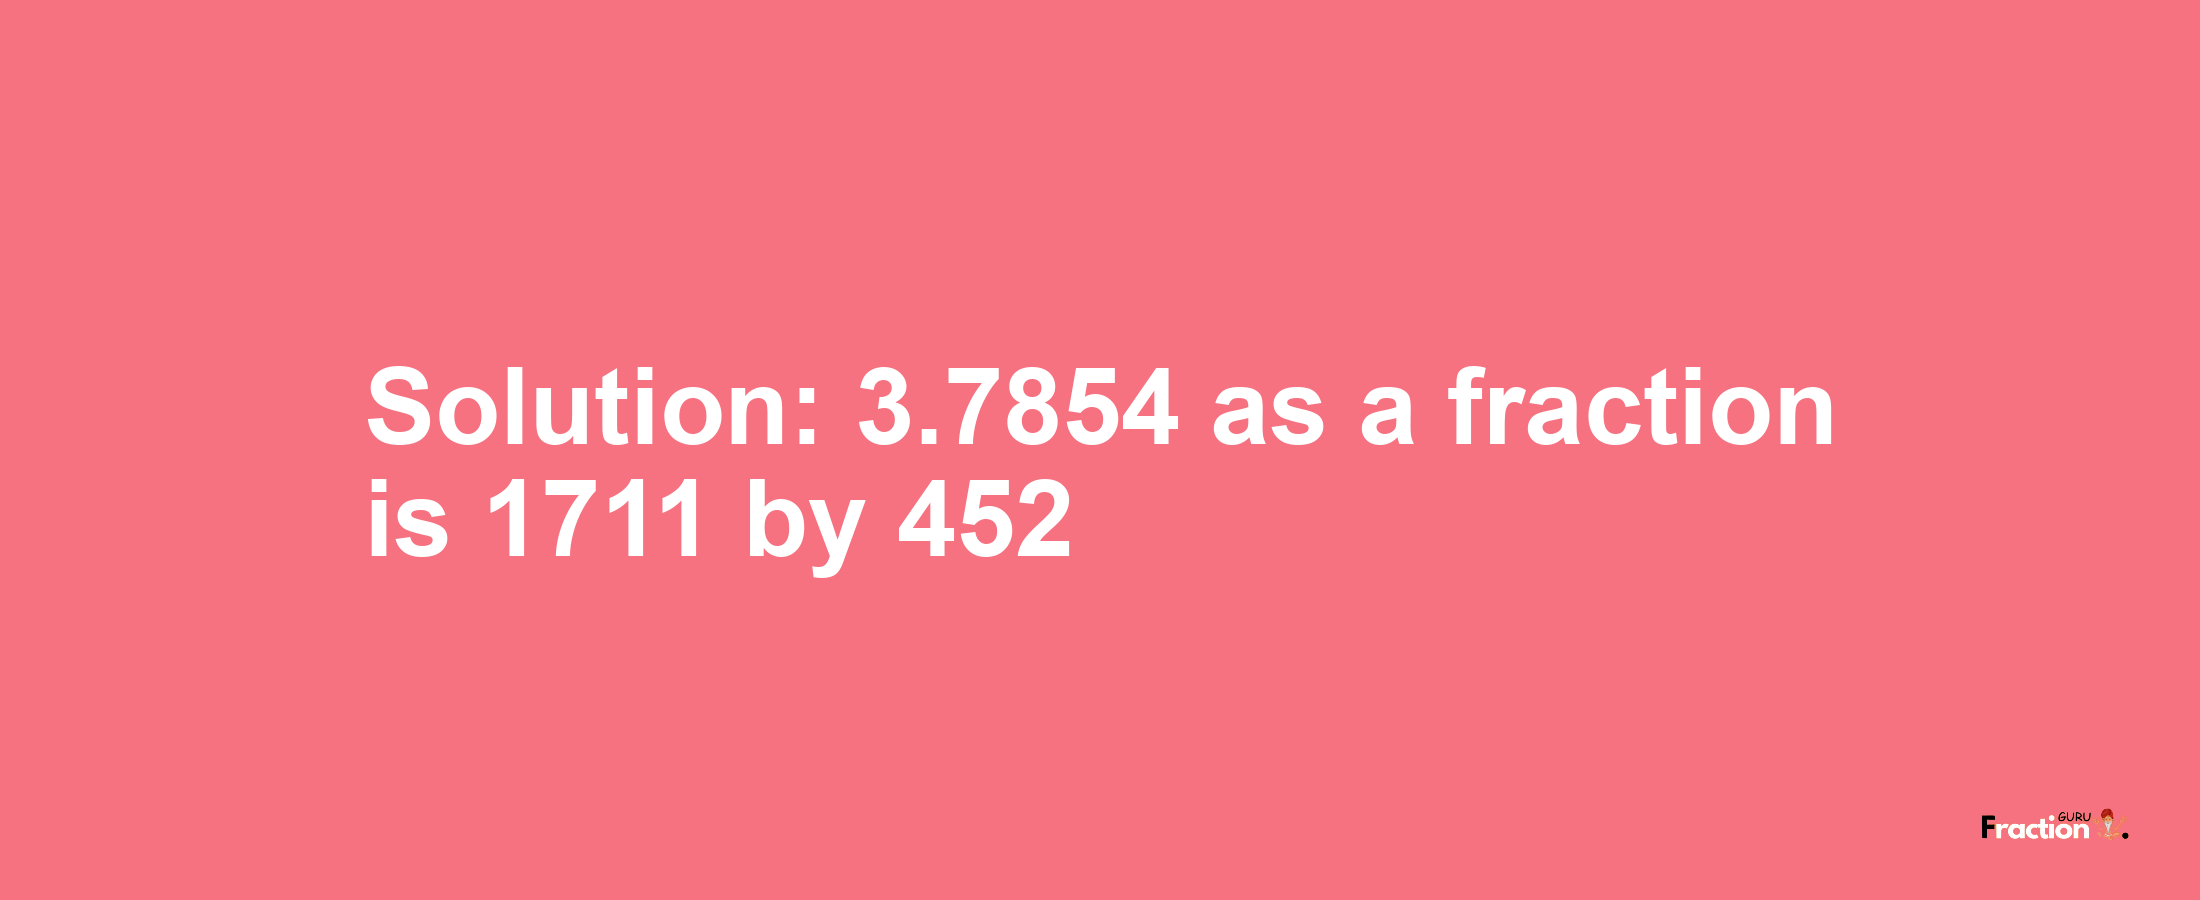 Solution:3.7854 as a fraction is 1711/452